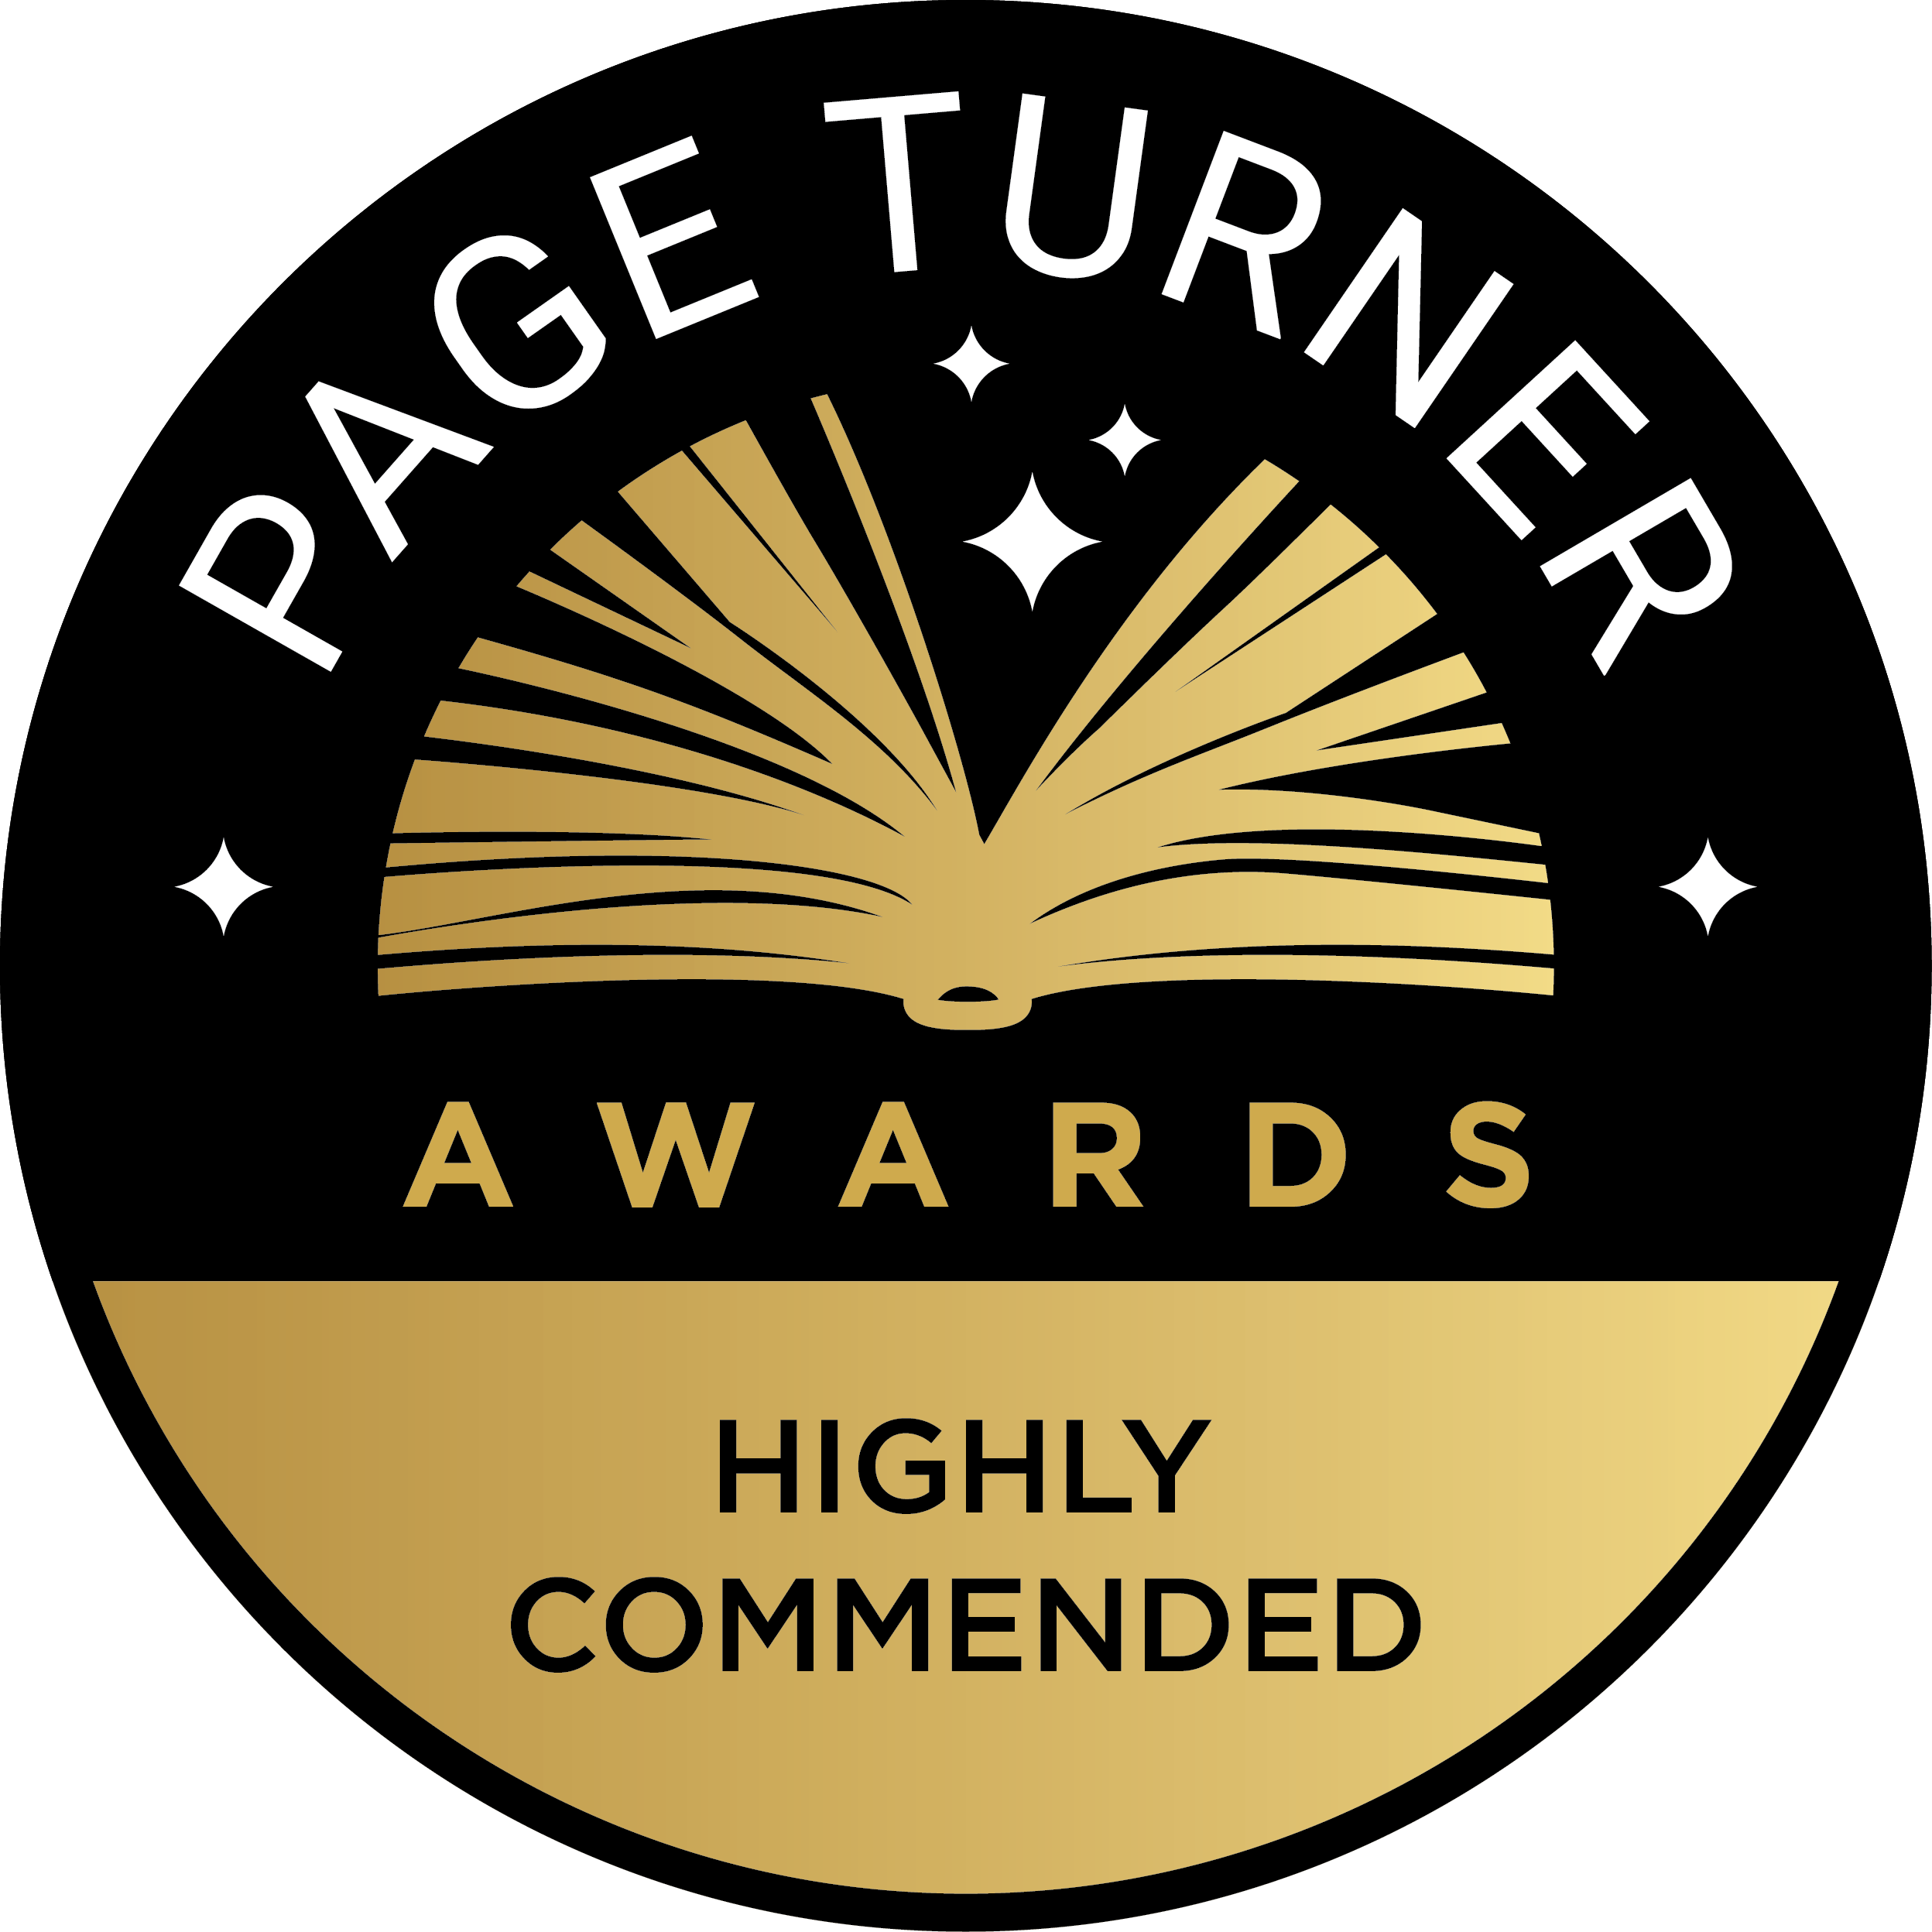 Page Turner Awards Highly Commended